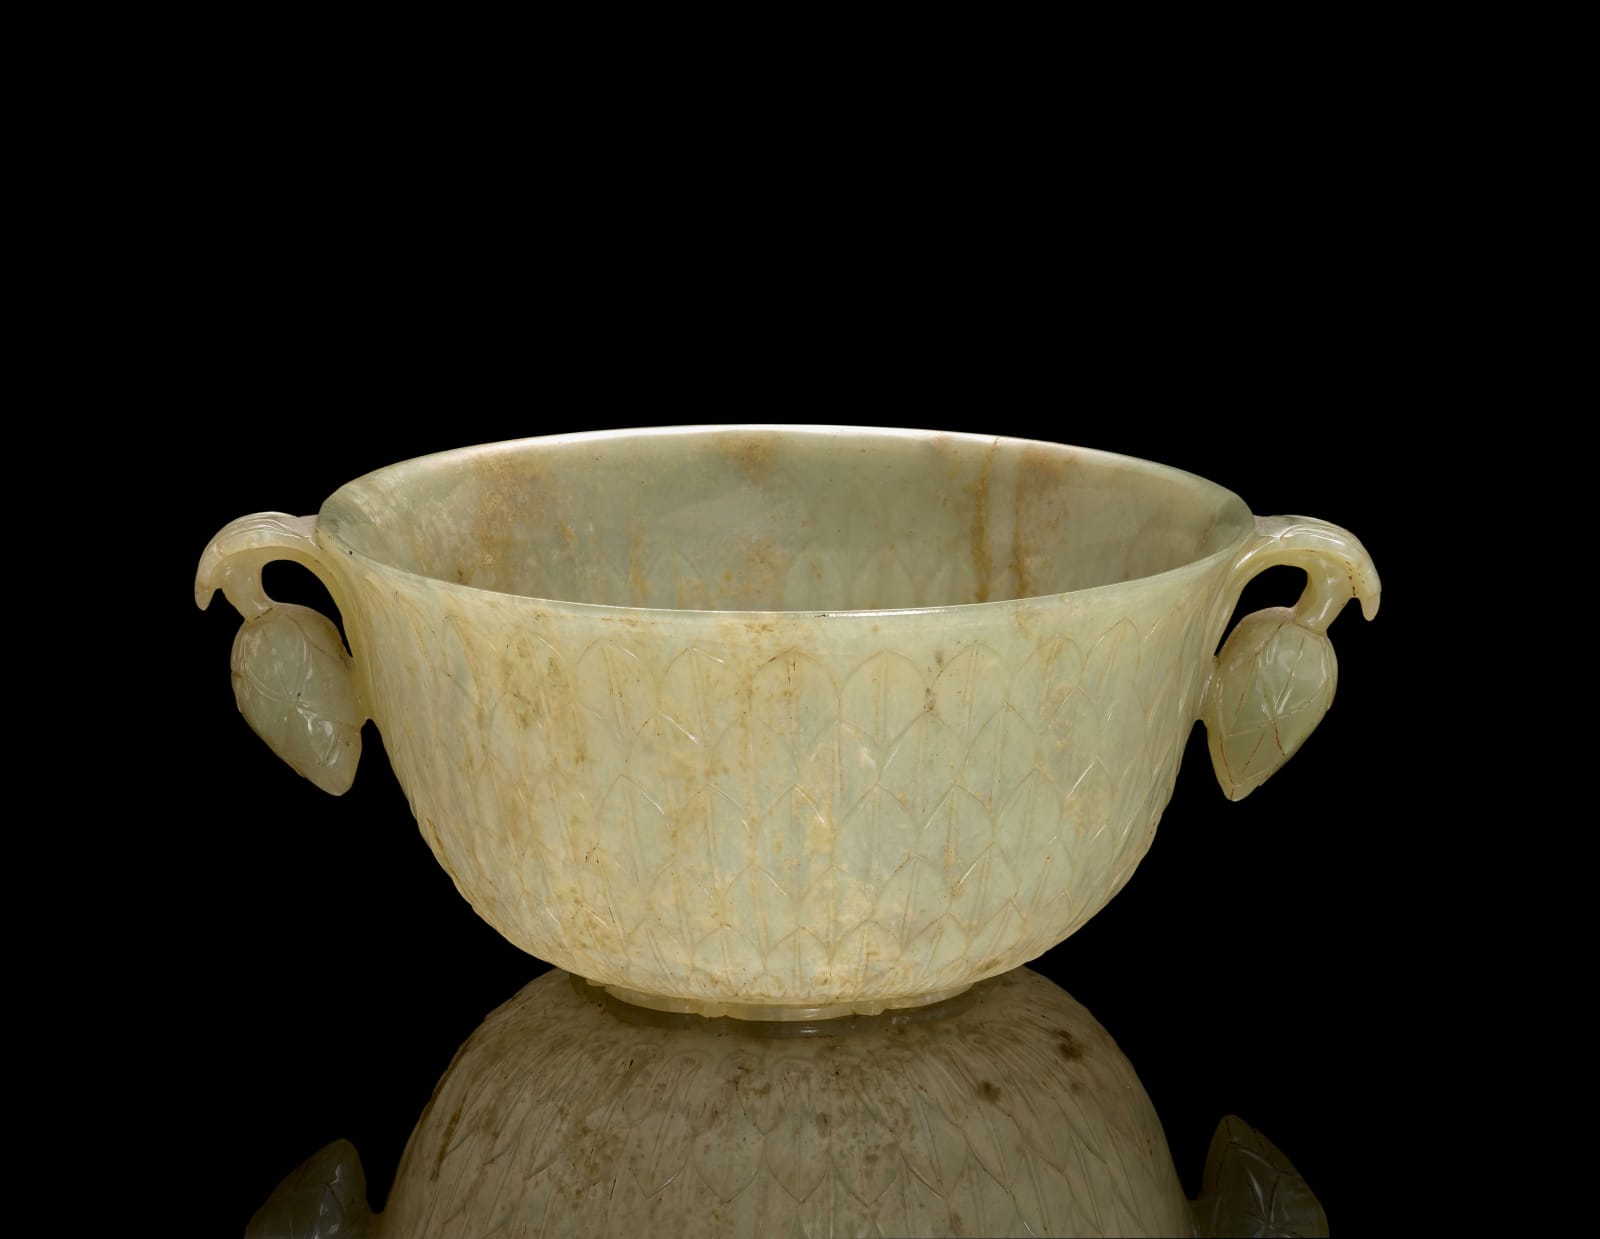 Bowl Mughal, Northern India, c. 1720-40 Jade Height 7 cm; Diameter 18 cm (with handles); 14 cm (without handles)